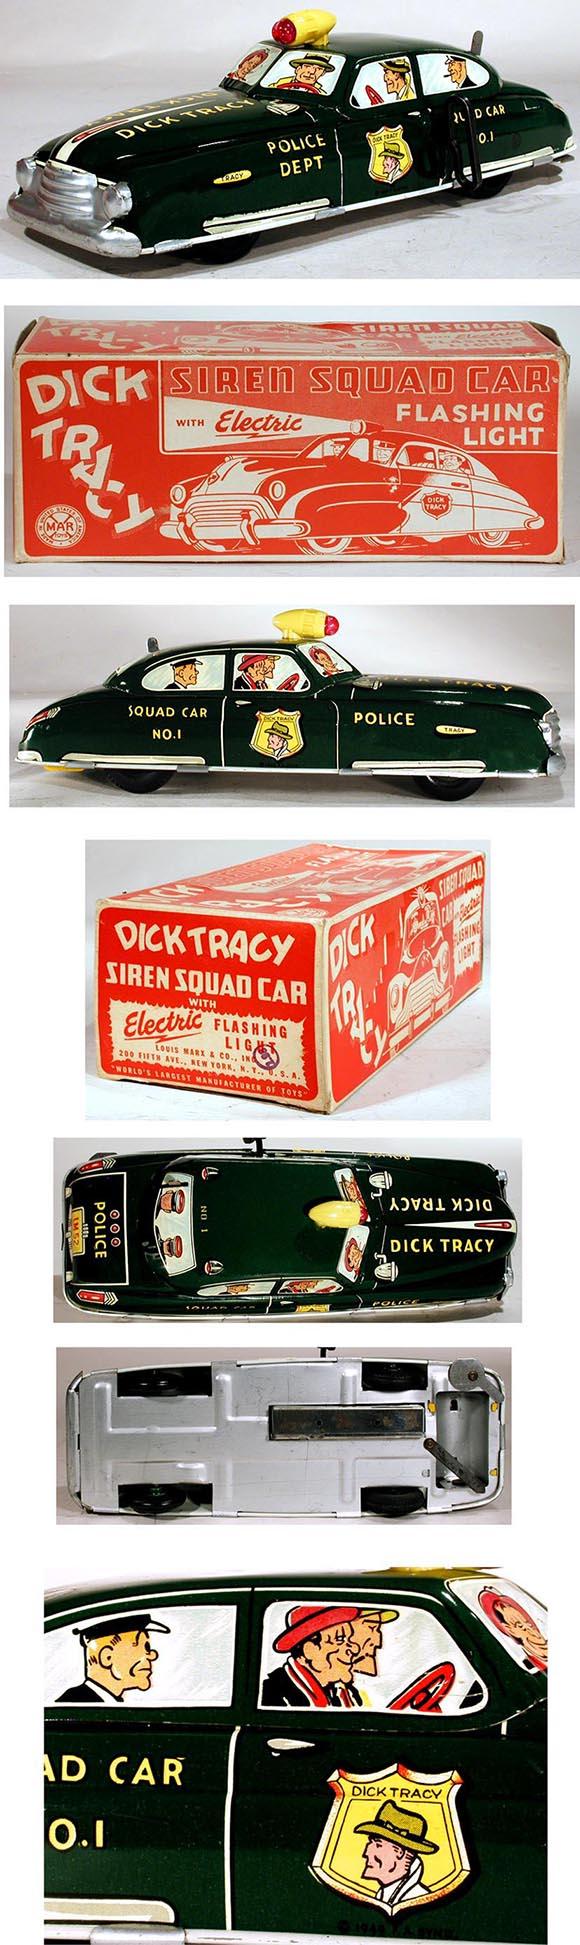 1949, Marx, Dick Tracy Siren Squad Car with Electric Flashing Light in Original Box